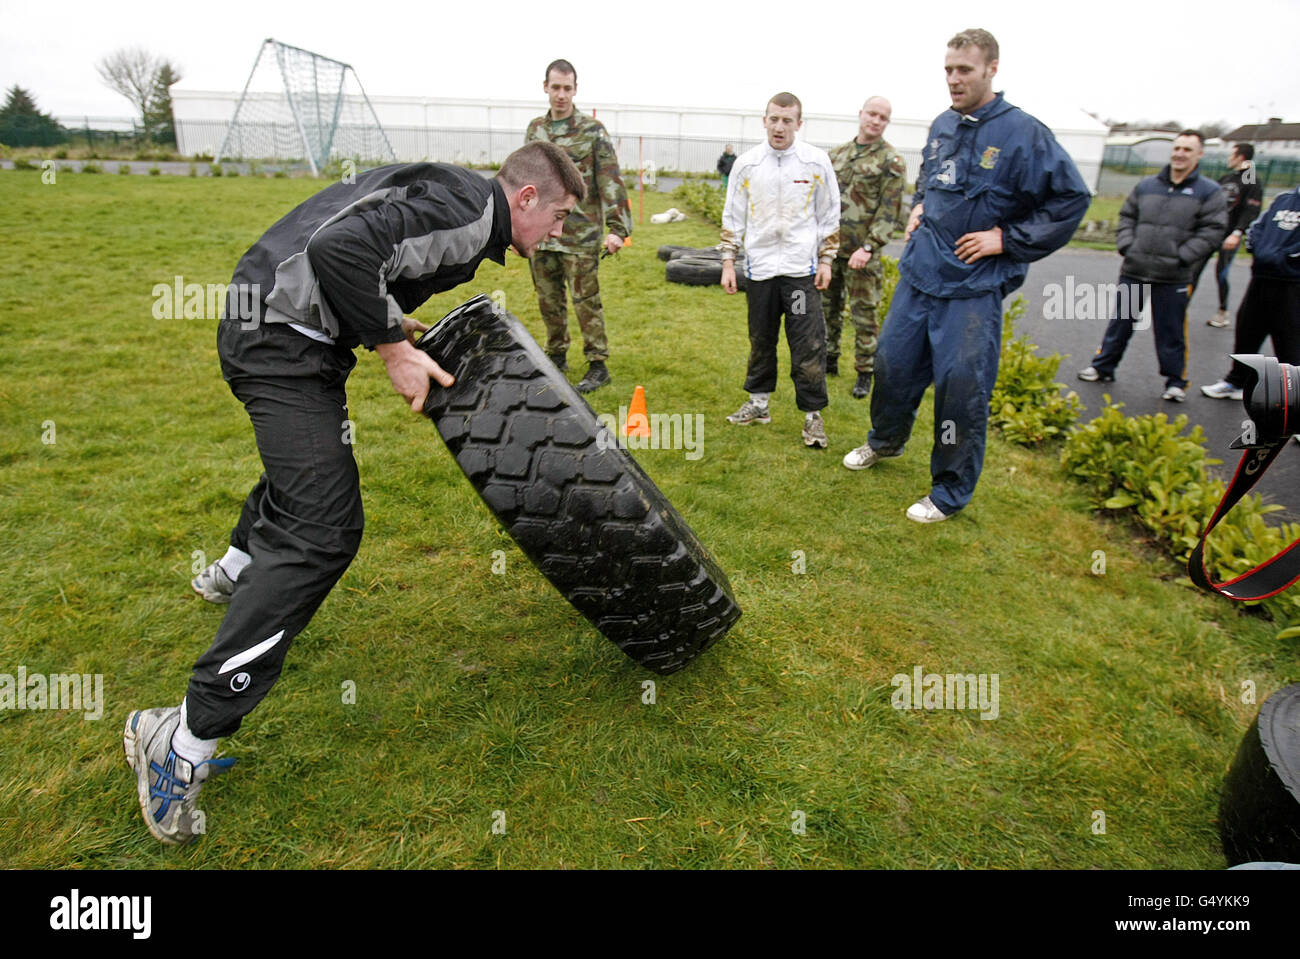 Ireland's Joe Ward carries a tyre during the Irish Defence Forces endurance and team building assault course at the Curragh Army Camp, Curragh. Stock Photo